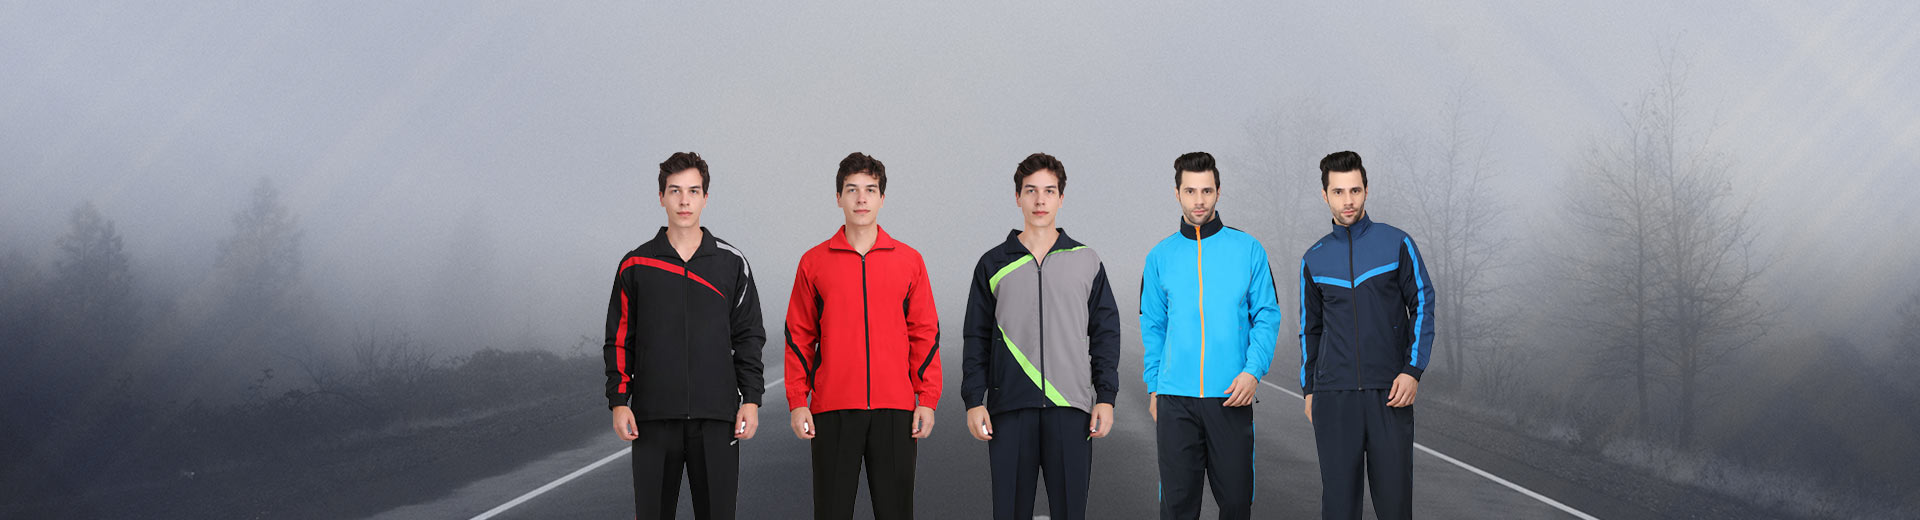 Tracksuits Manufacturers in Chandler